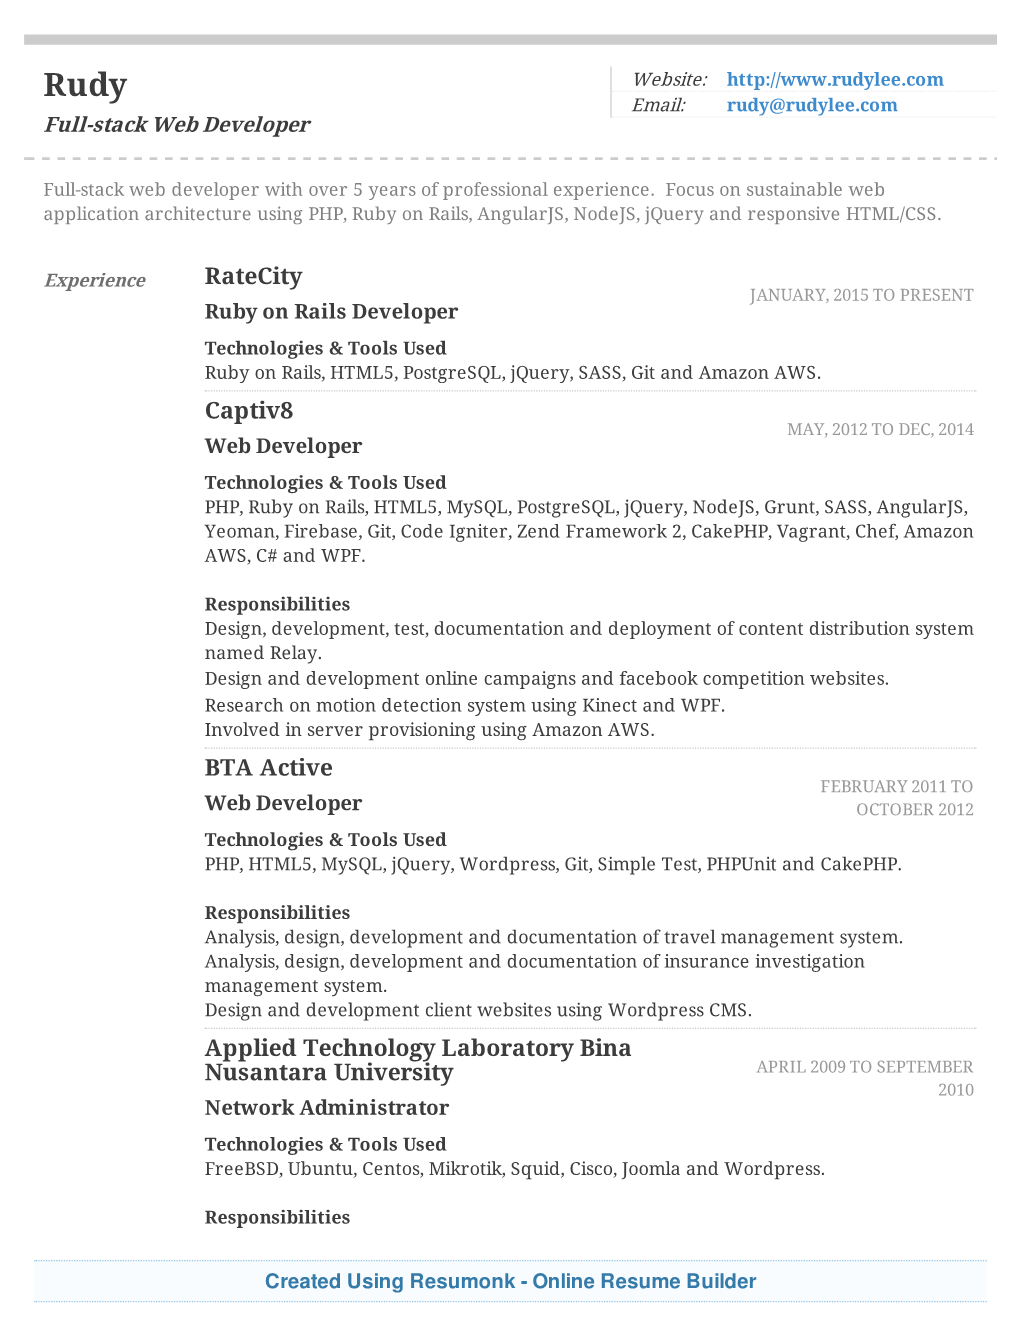 Online Resume Builder Managing Network System for Internal and External Clients